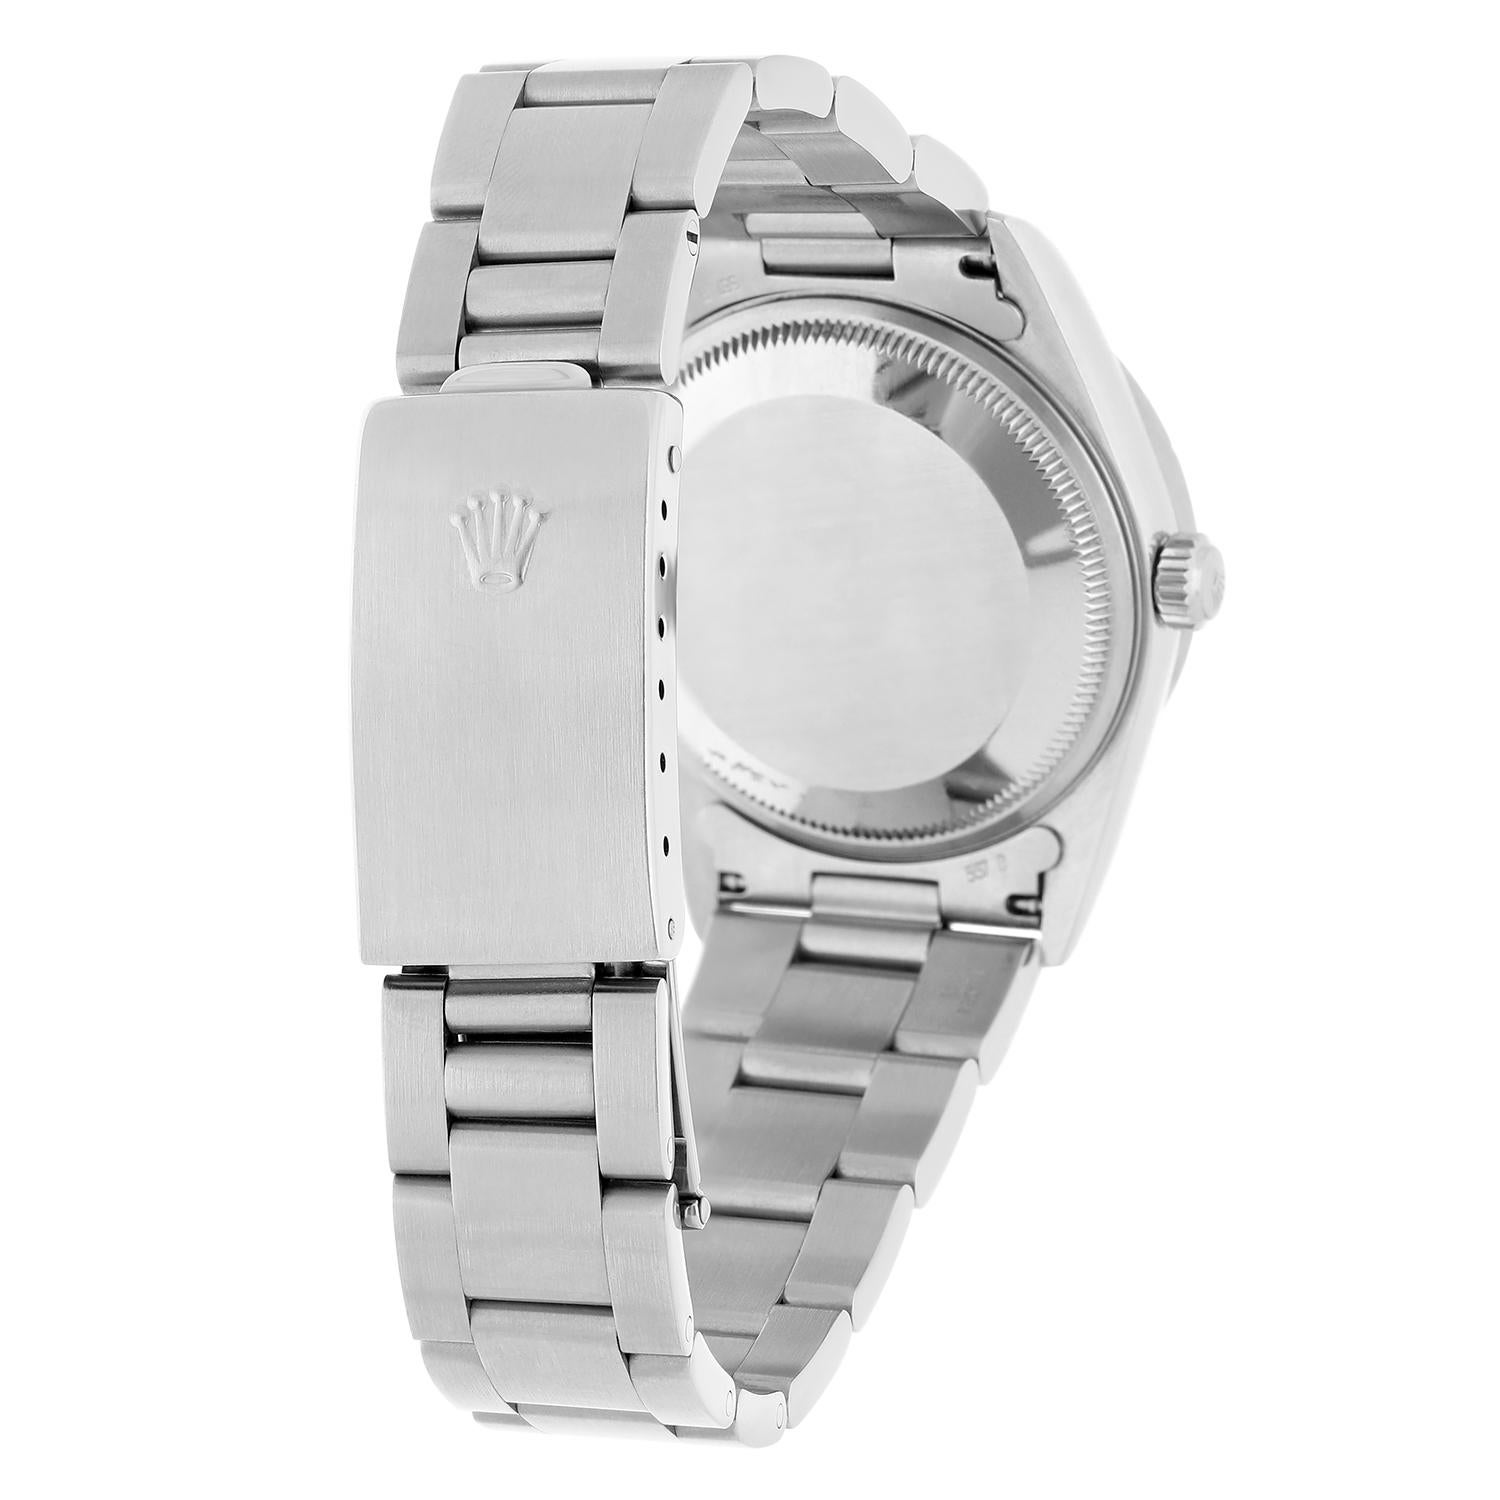 Unisex Rolex Date Stainless Steel Watch Oyster Black Dial 15210 Circa 1999 For Sale 2